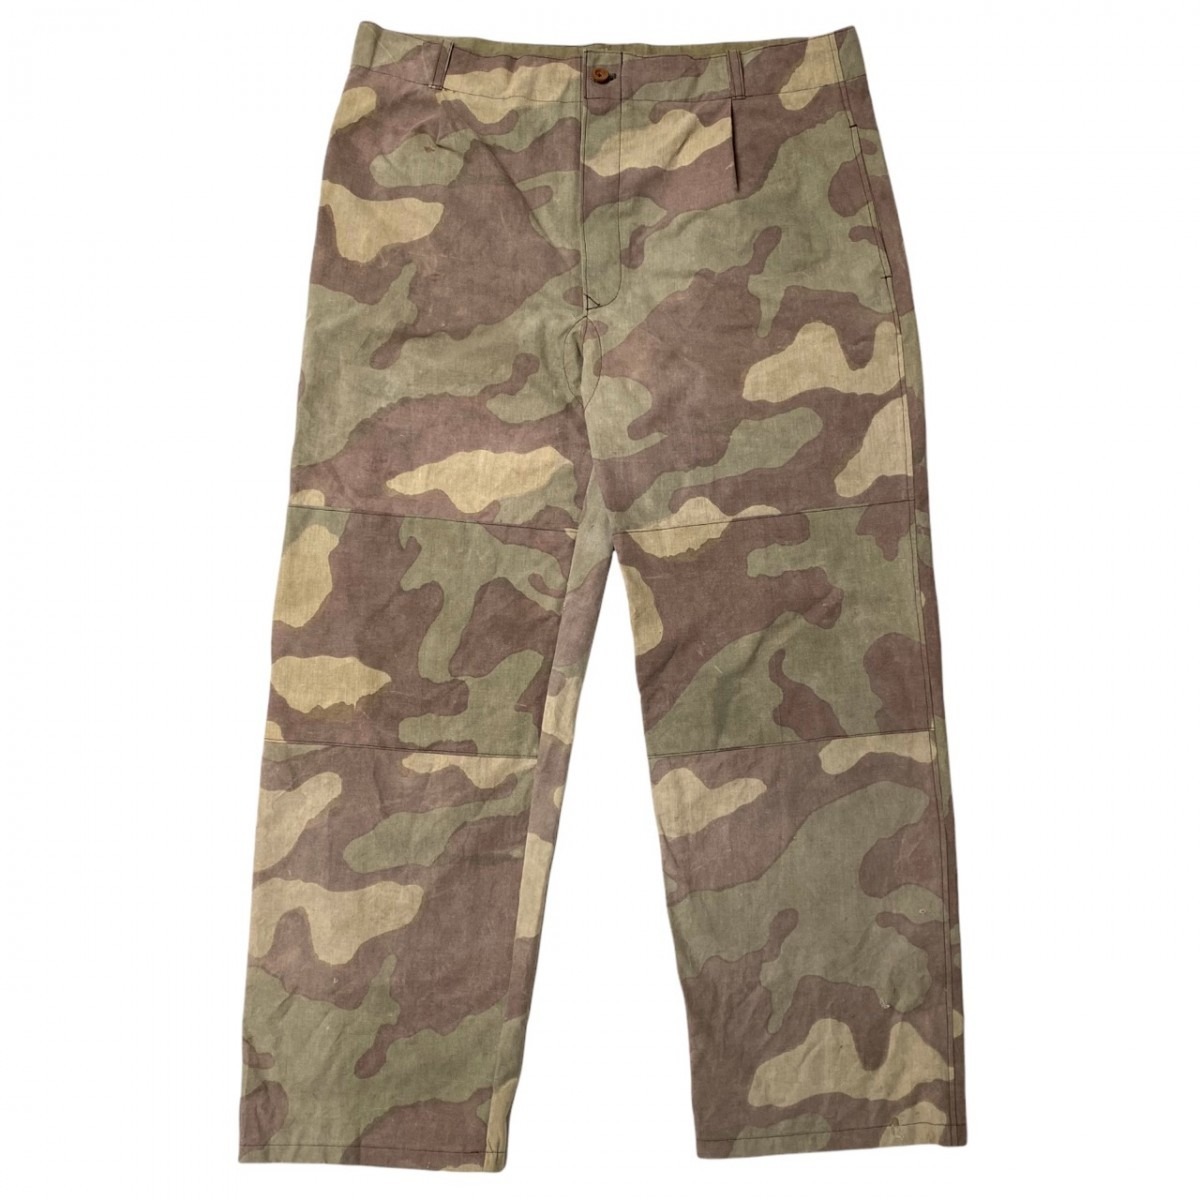 Original WWII German WH/Waffen-SS field made camouflage trousers ...